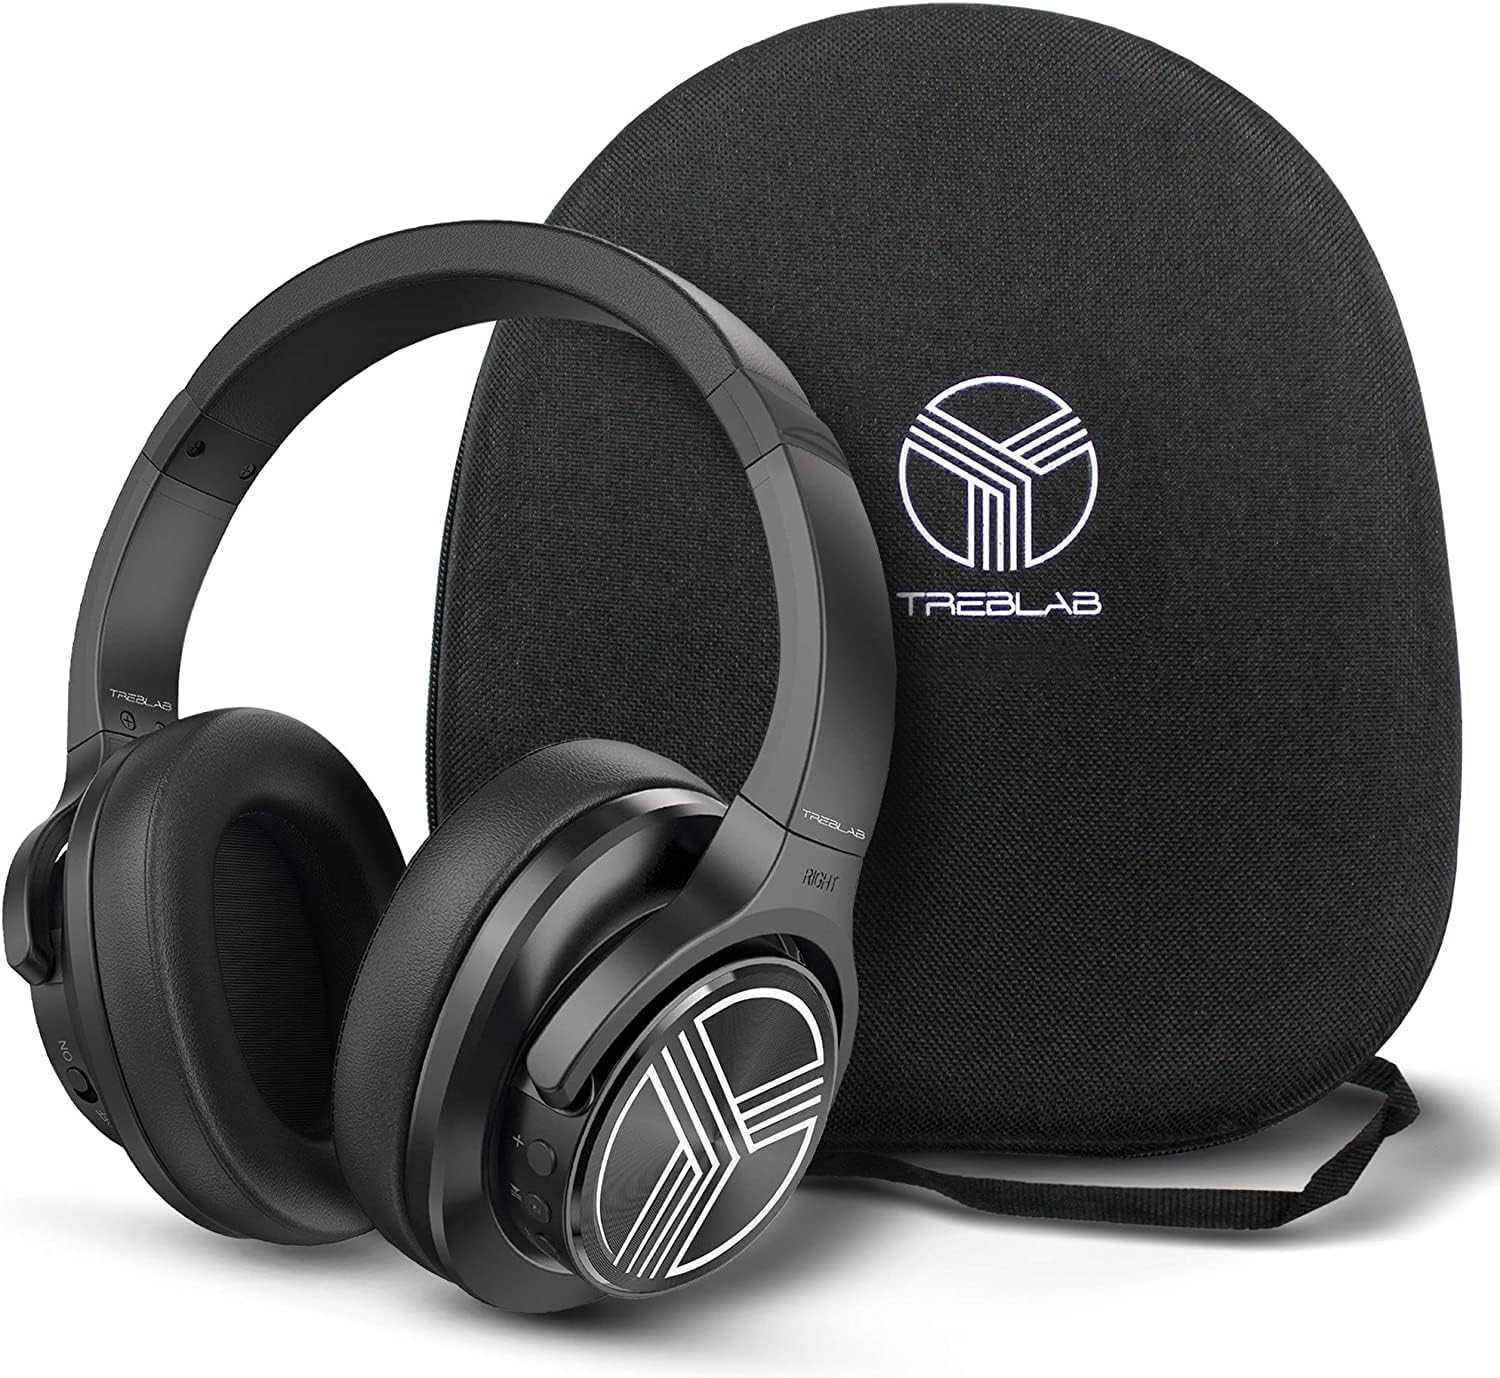 Best Over Ear Headphones for Working Out